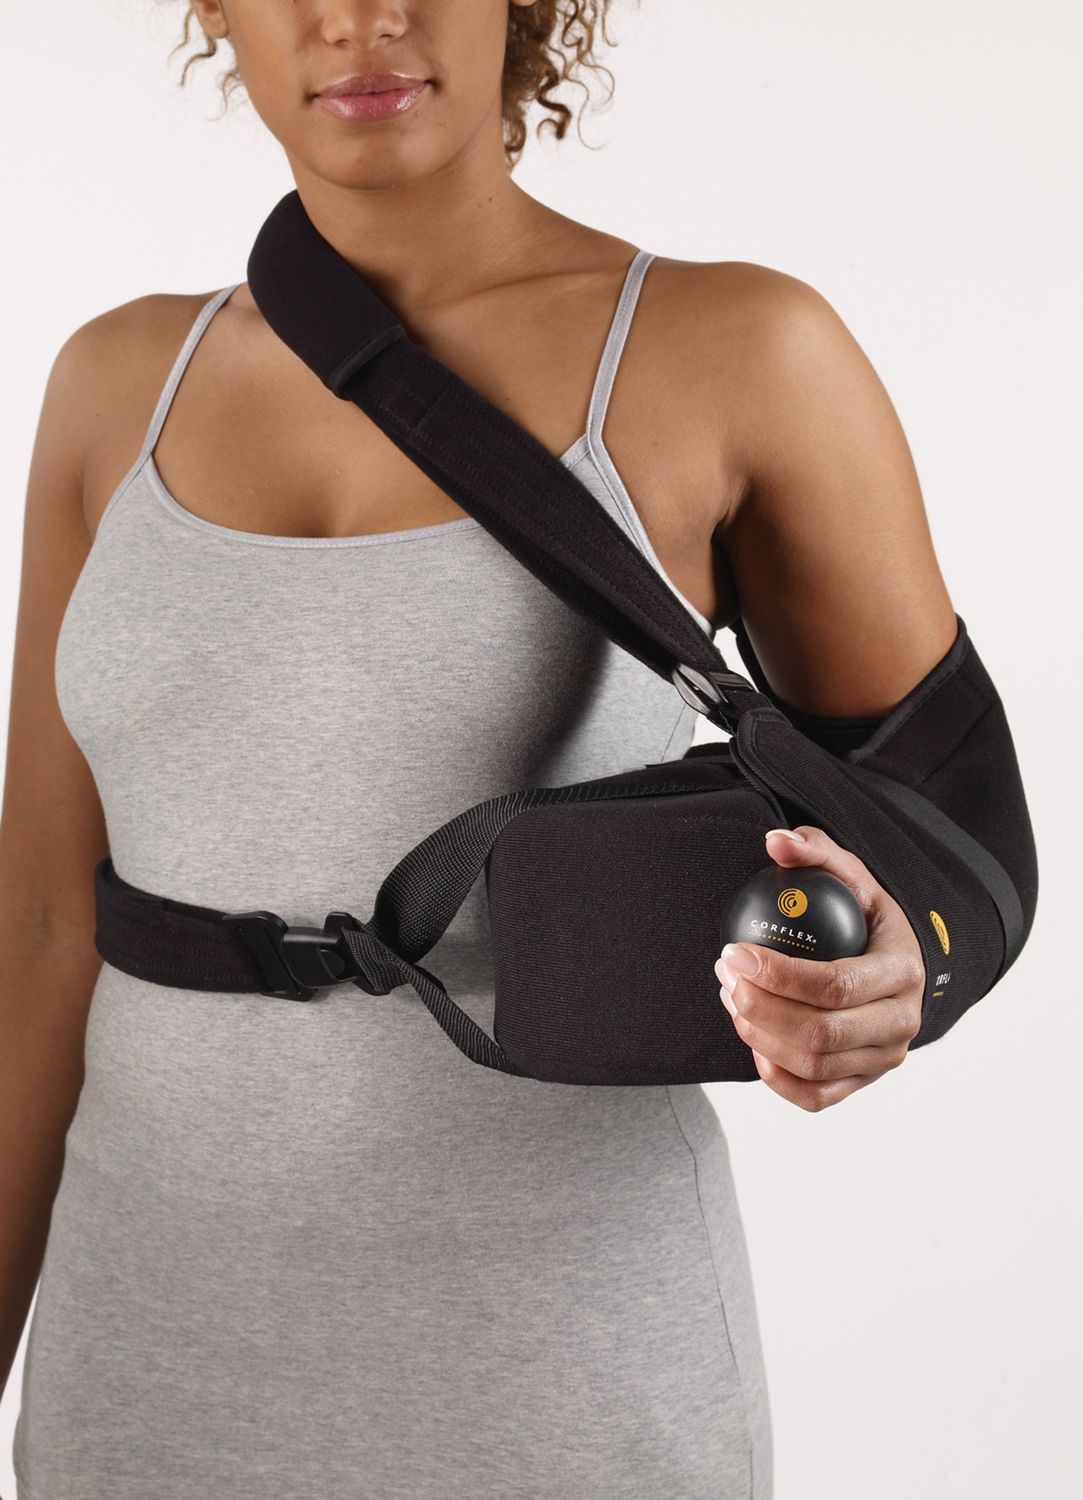 Arm sling with shoulder abduction pillow / human 23-1901 / 23-1902 / 23-1903 / 23-1904 Corflex